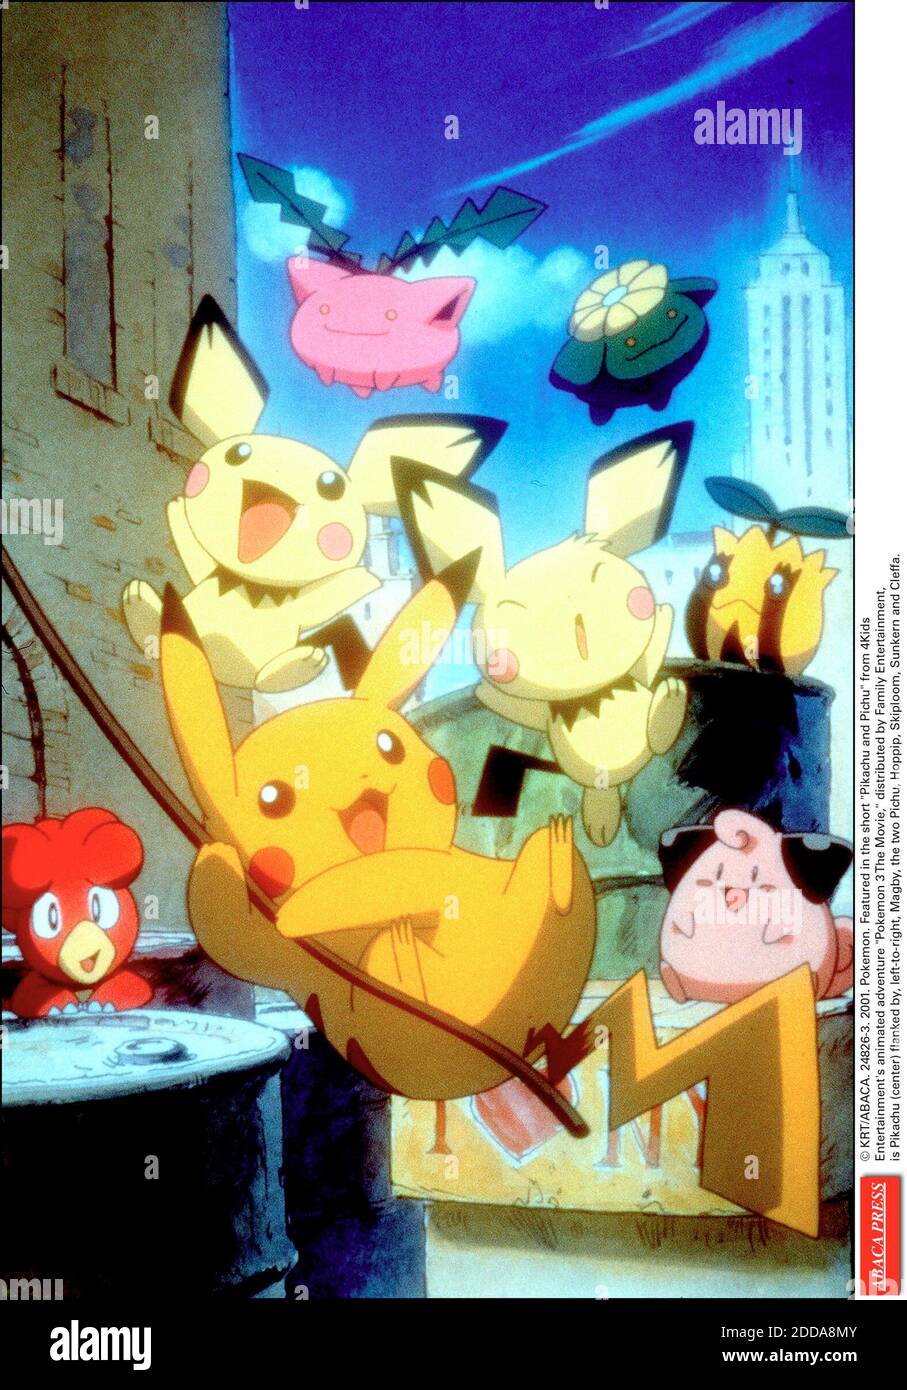 NO FILM, NO VIDEO, NO TV, NO DOCUMENTARY - © KRT/ABACA. 24826-3. 2001.  Pokemon. Featured in the short Pikachu and Pichu from 4Kids Entertainment's  animated adventure Pokemon 3 The Movie, distributed by